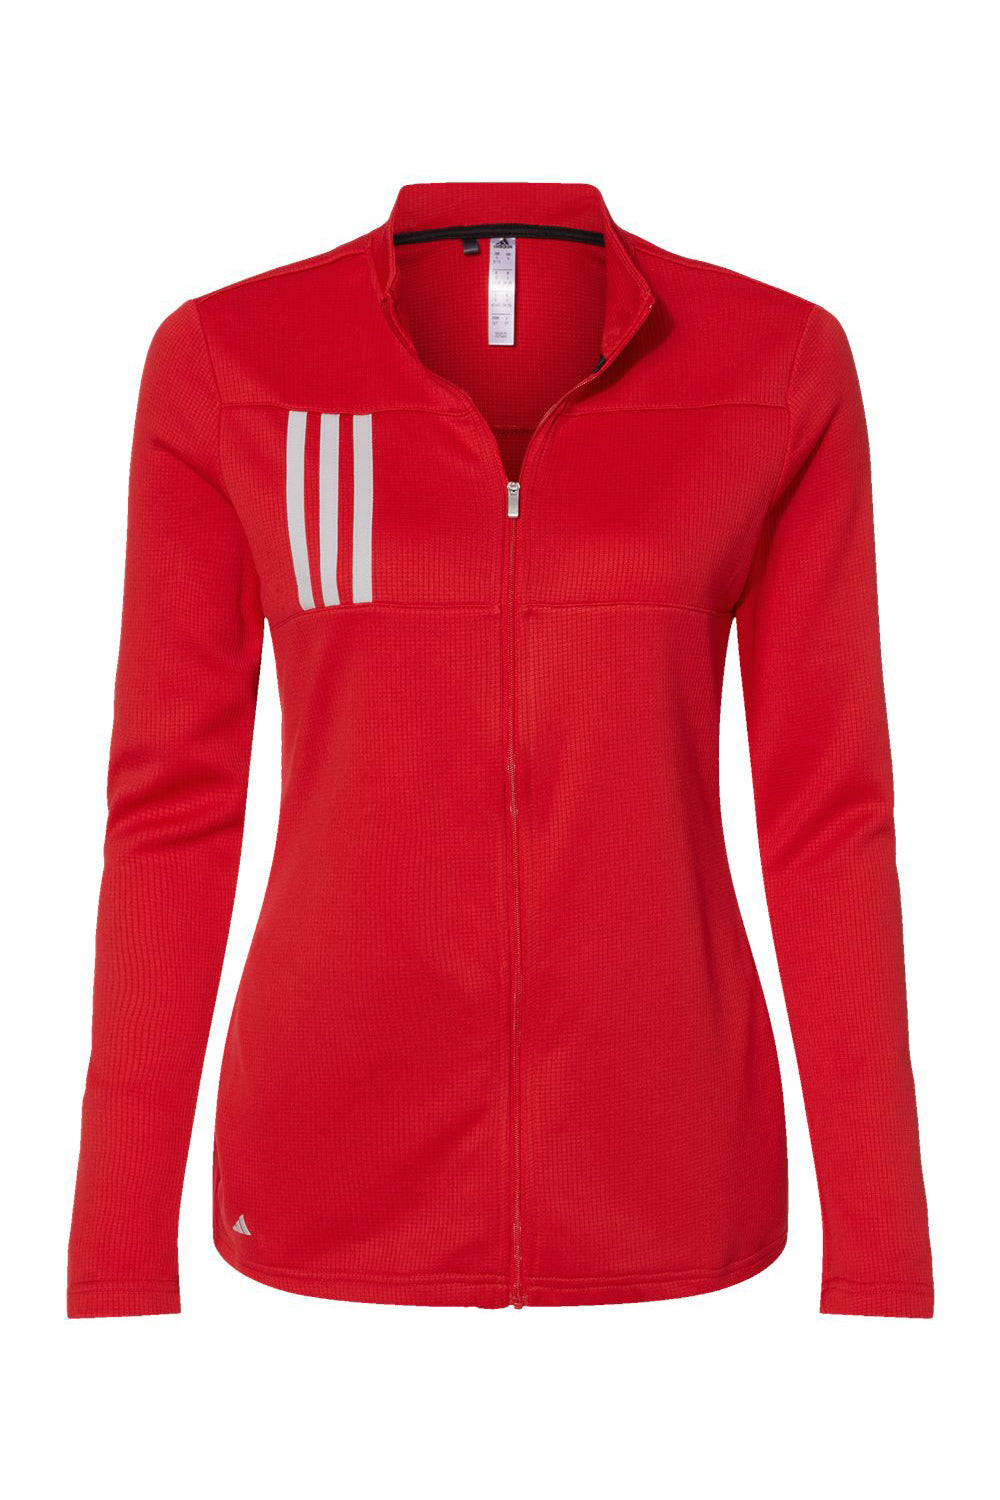 Adidas A483 Womens 3 Stripes Double Knit 1/4 Zip Pullover Team Collegiate Red/Grey Flat Front